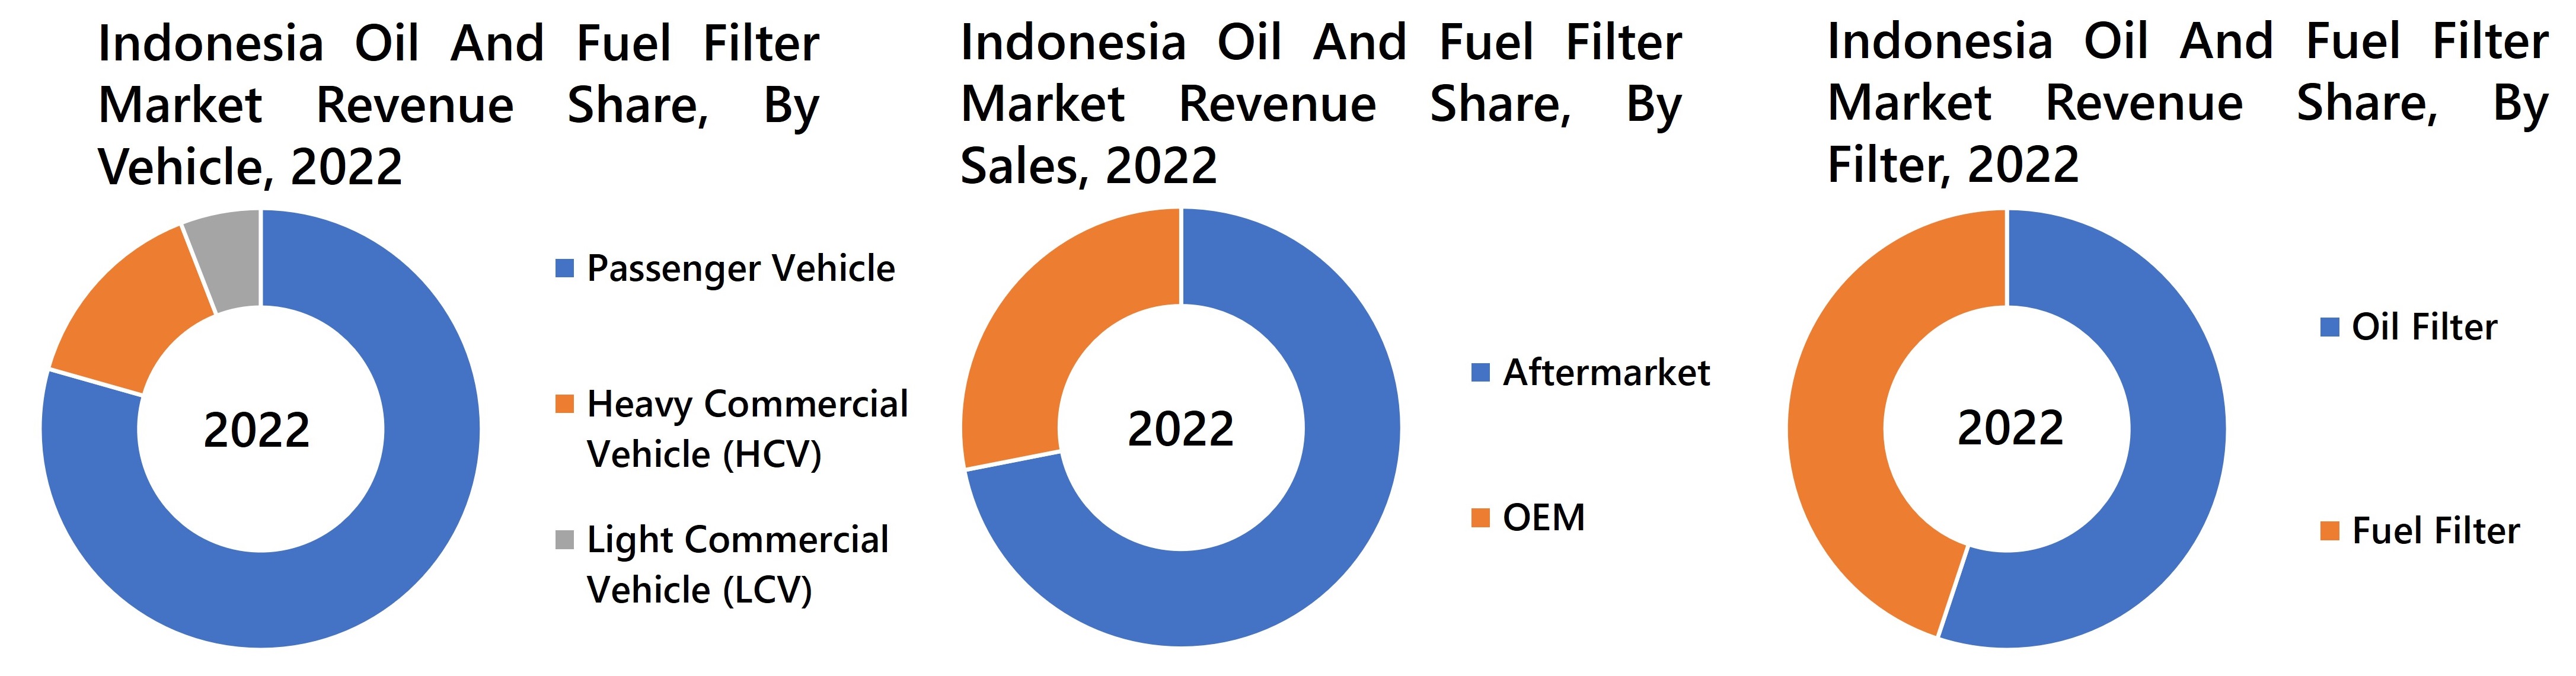 Indonesia Oil And Fuel Filter Market Revenue Share